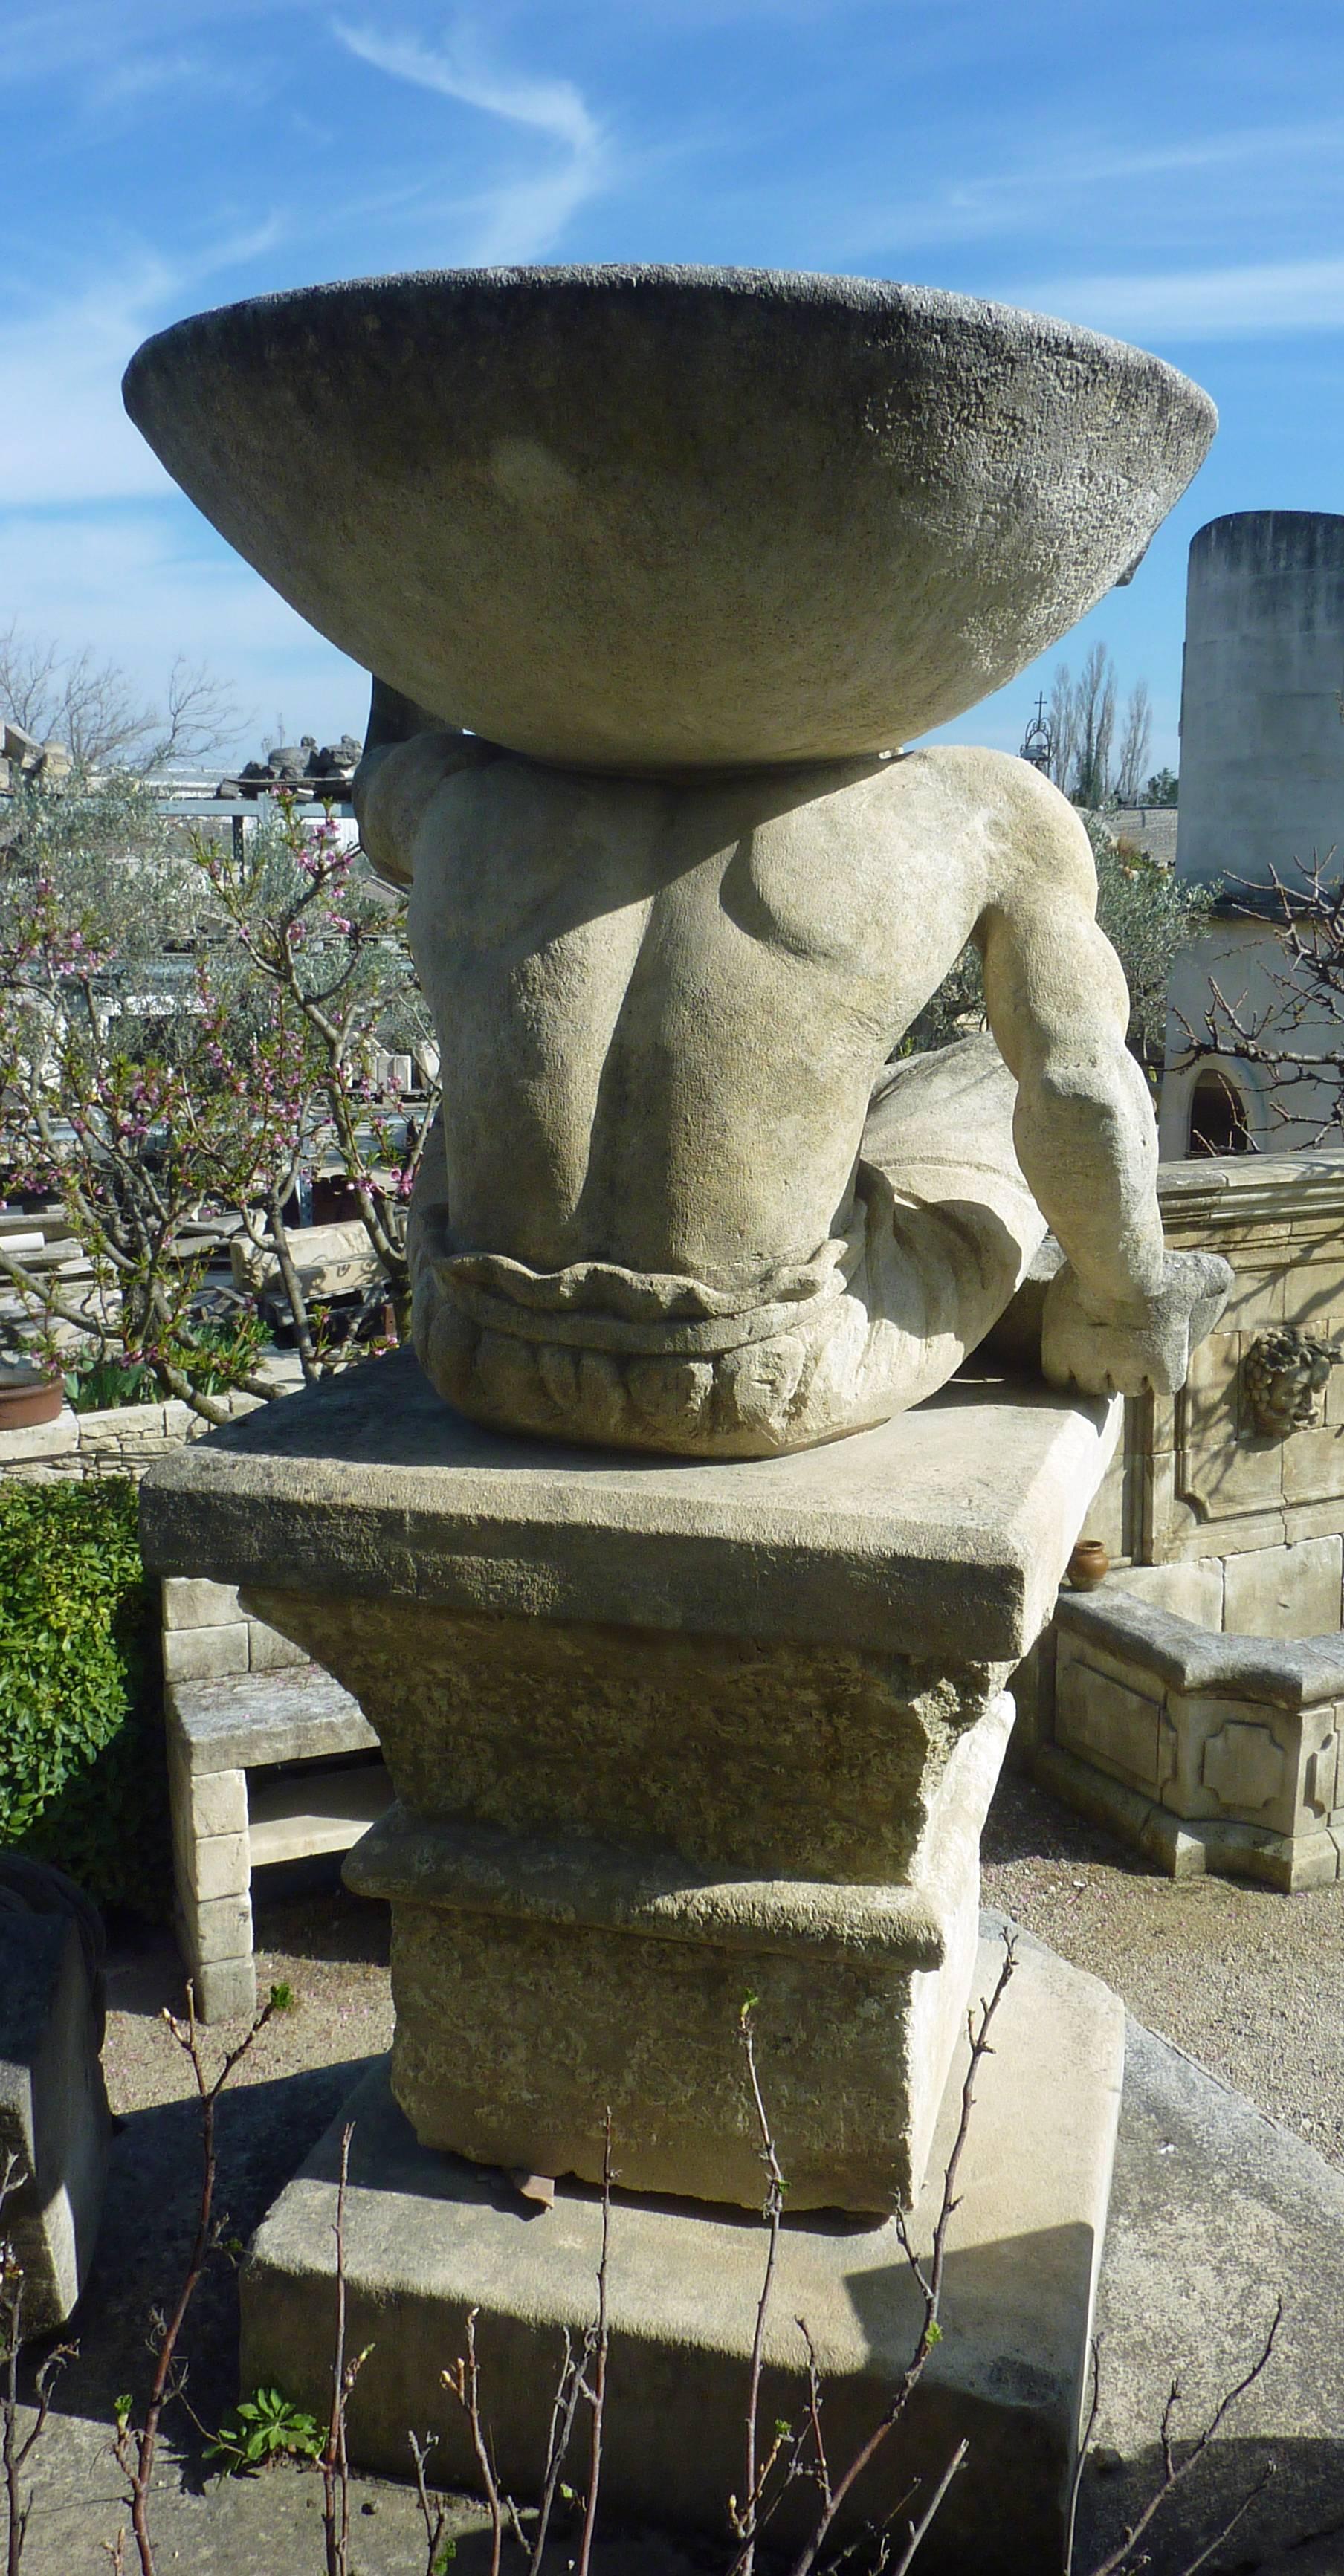 This superb statue has been carved and finely hand-sculpted in a natural limestone from Provence, the stone of Estaillades. Presenting a nice natural patina, it represents the famous character from the novel 